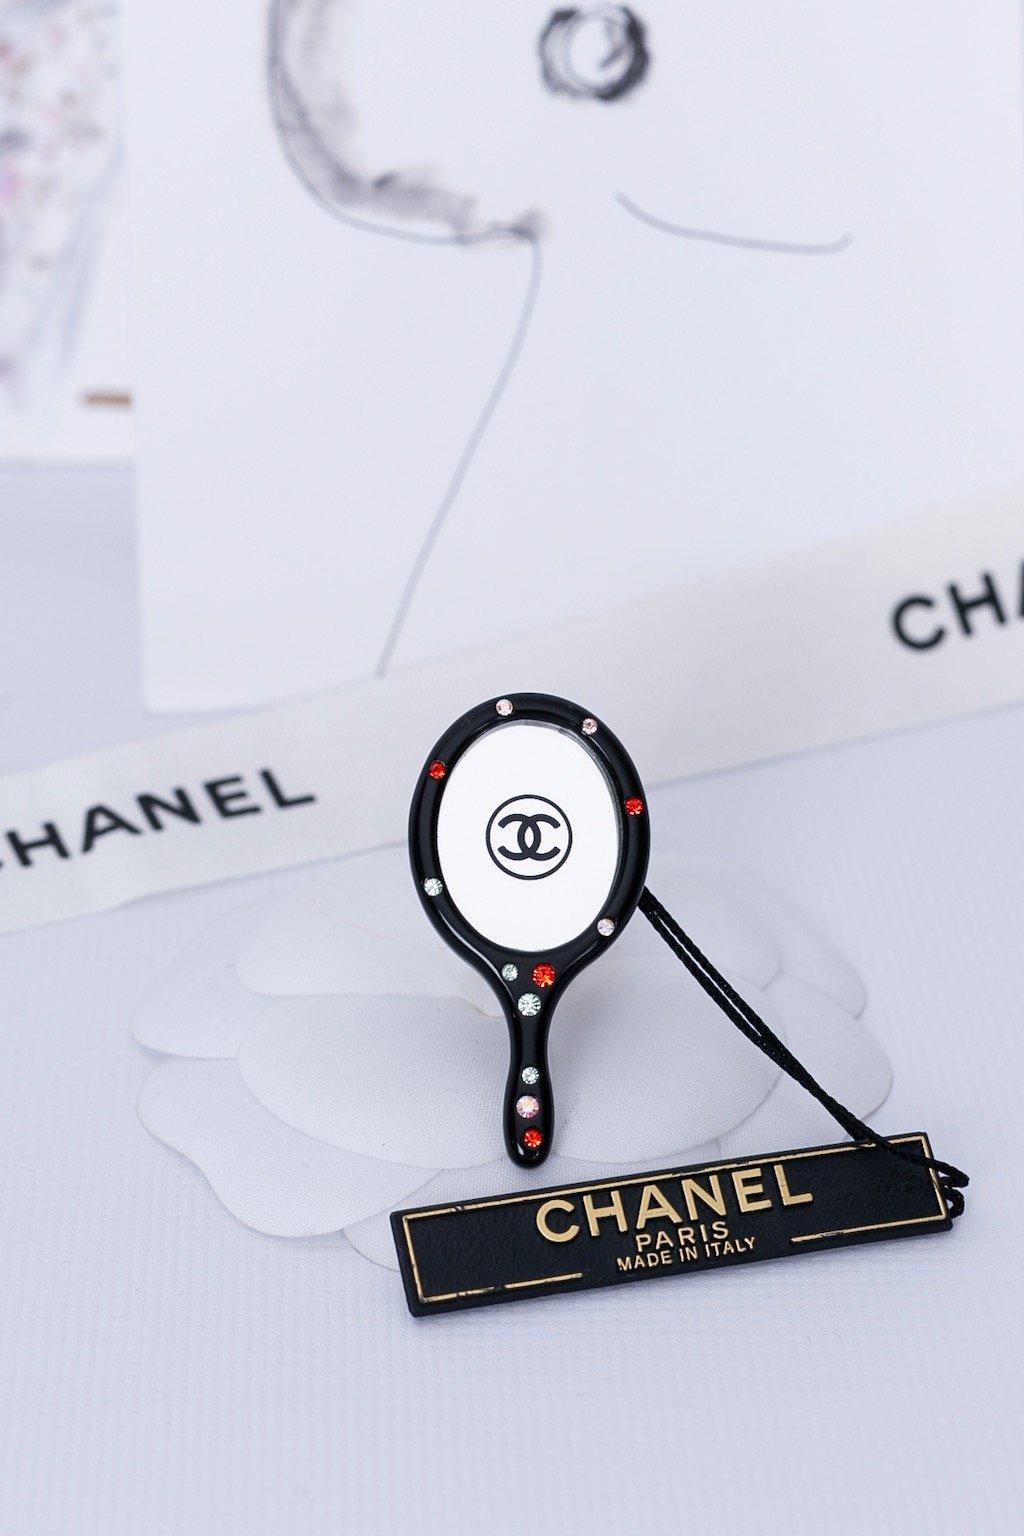 Chanel Set of Bakelite Pins, Make Up Collection, 2004 12